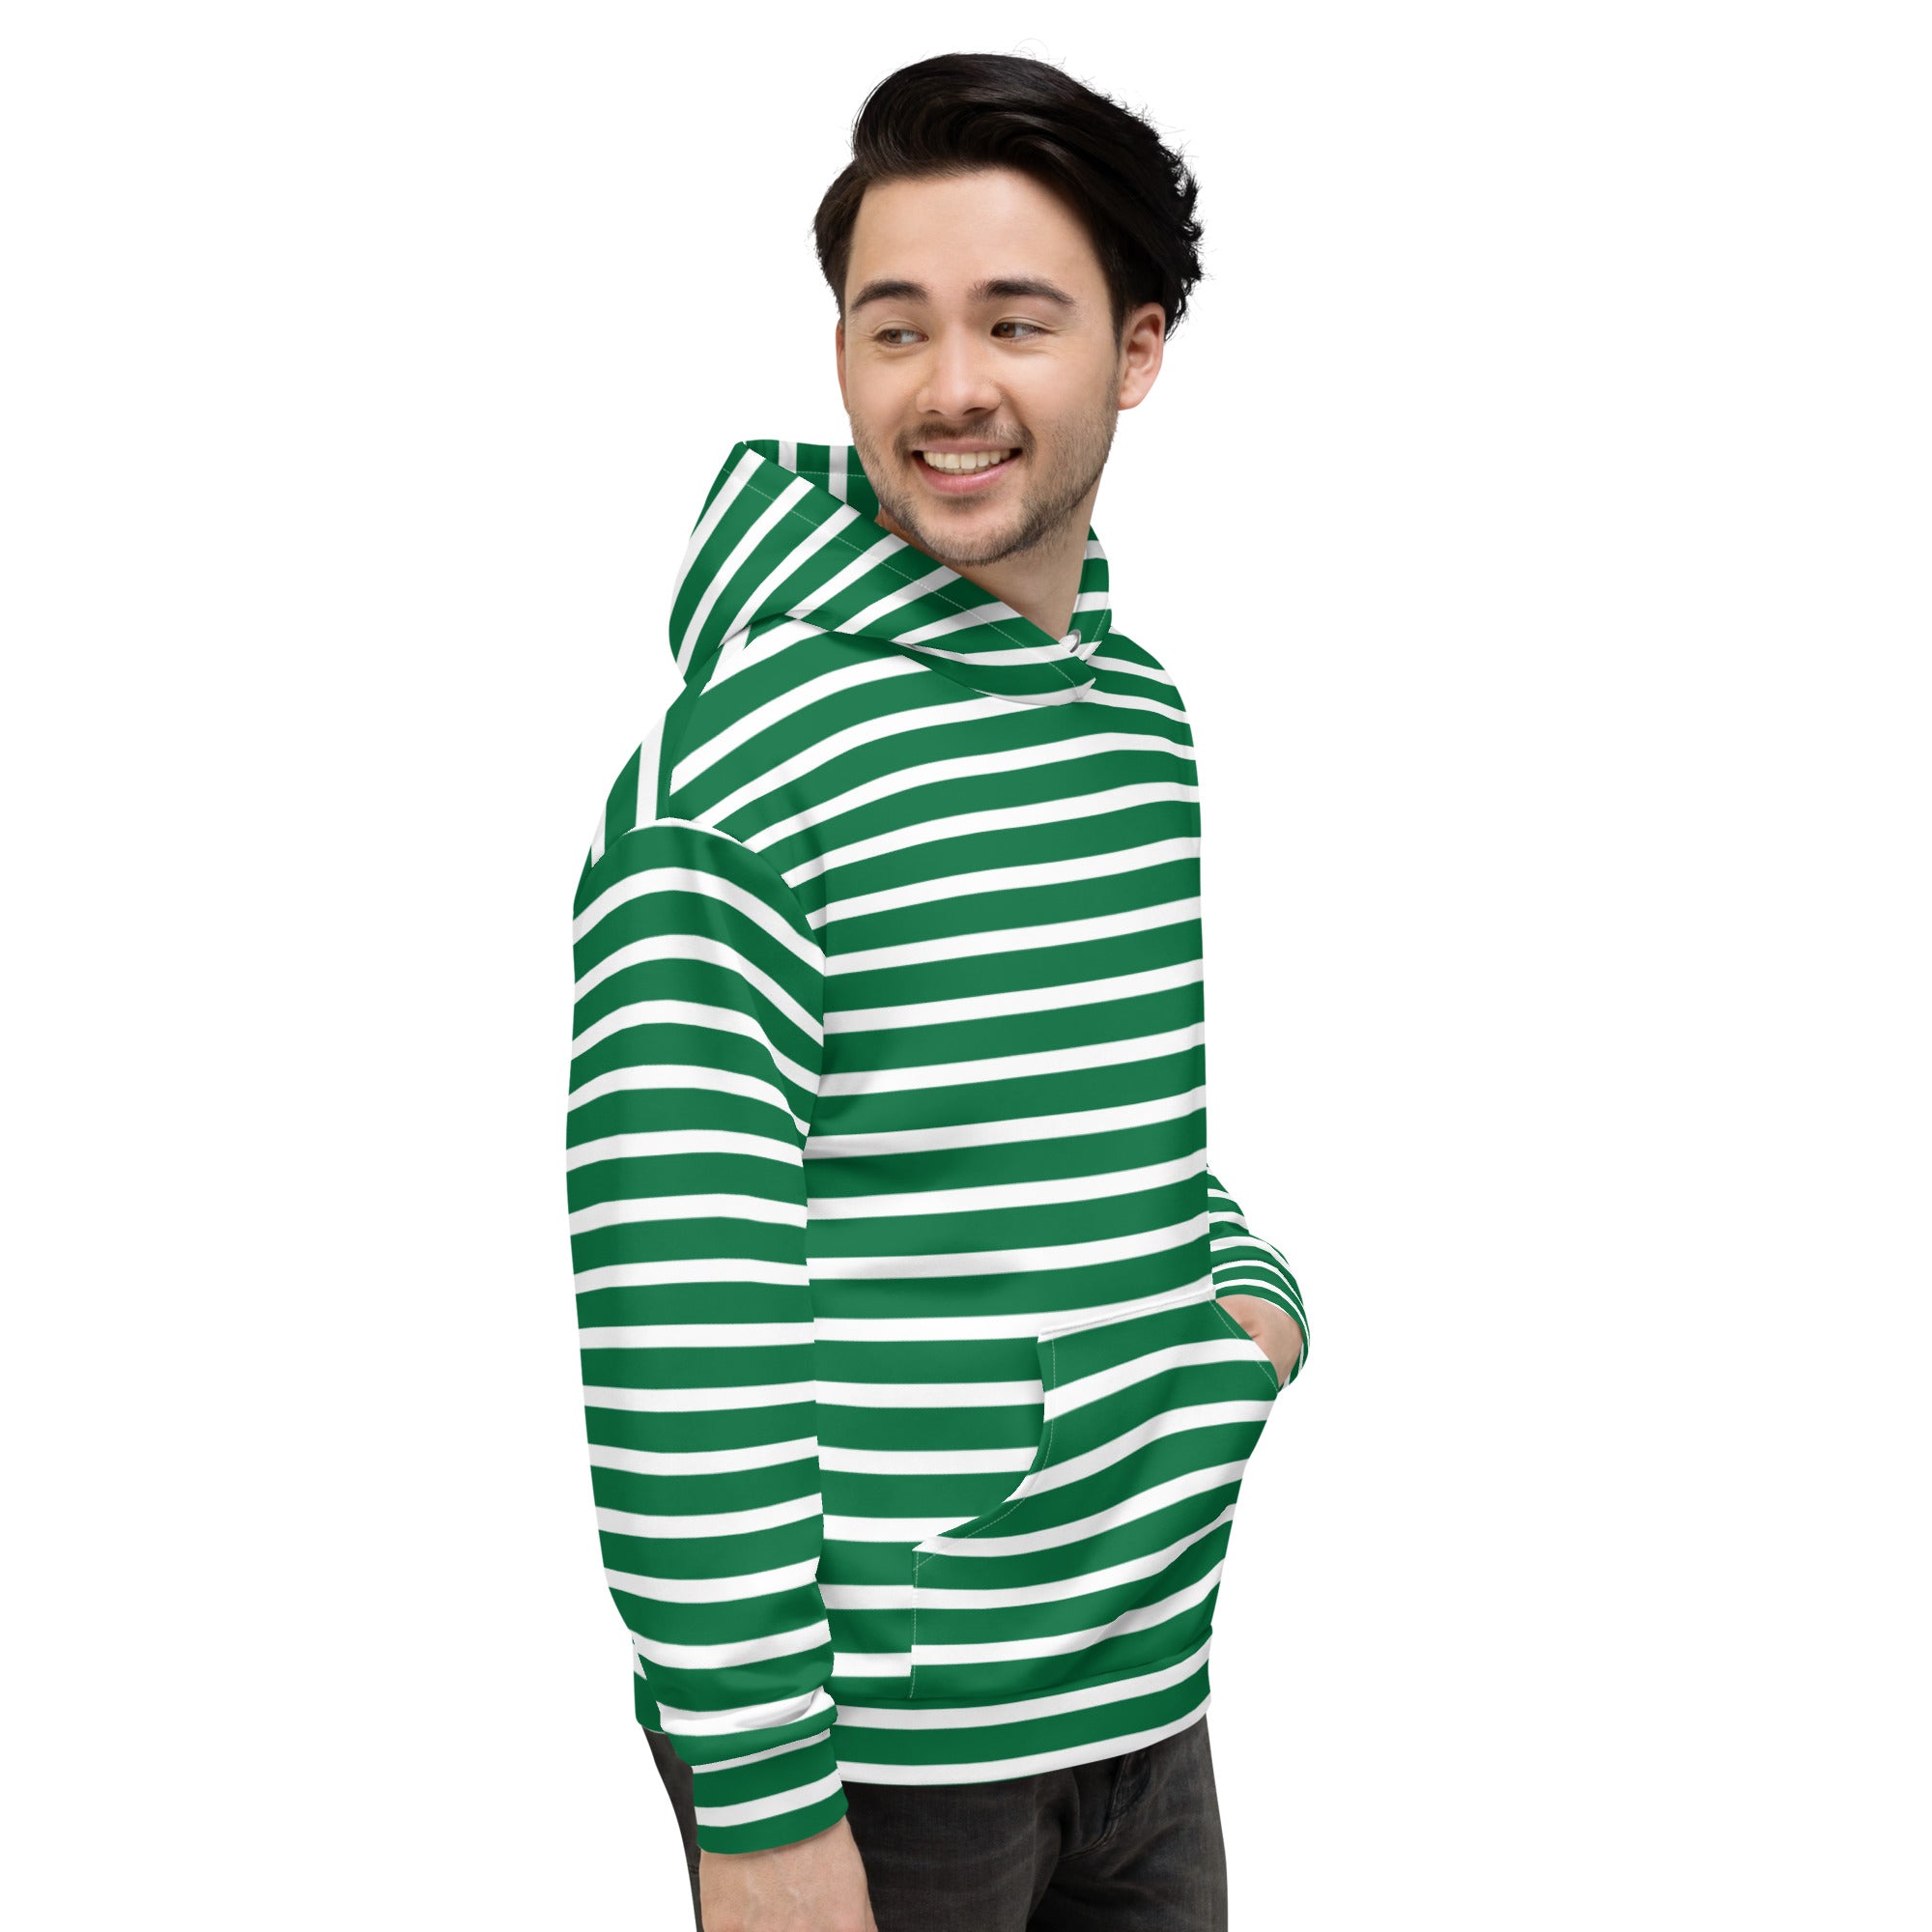 Unisex Hoodie- White and Green Striped